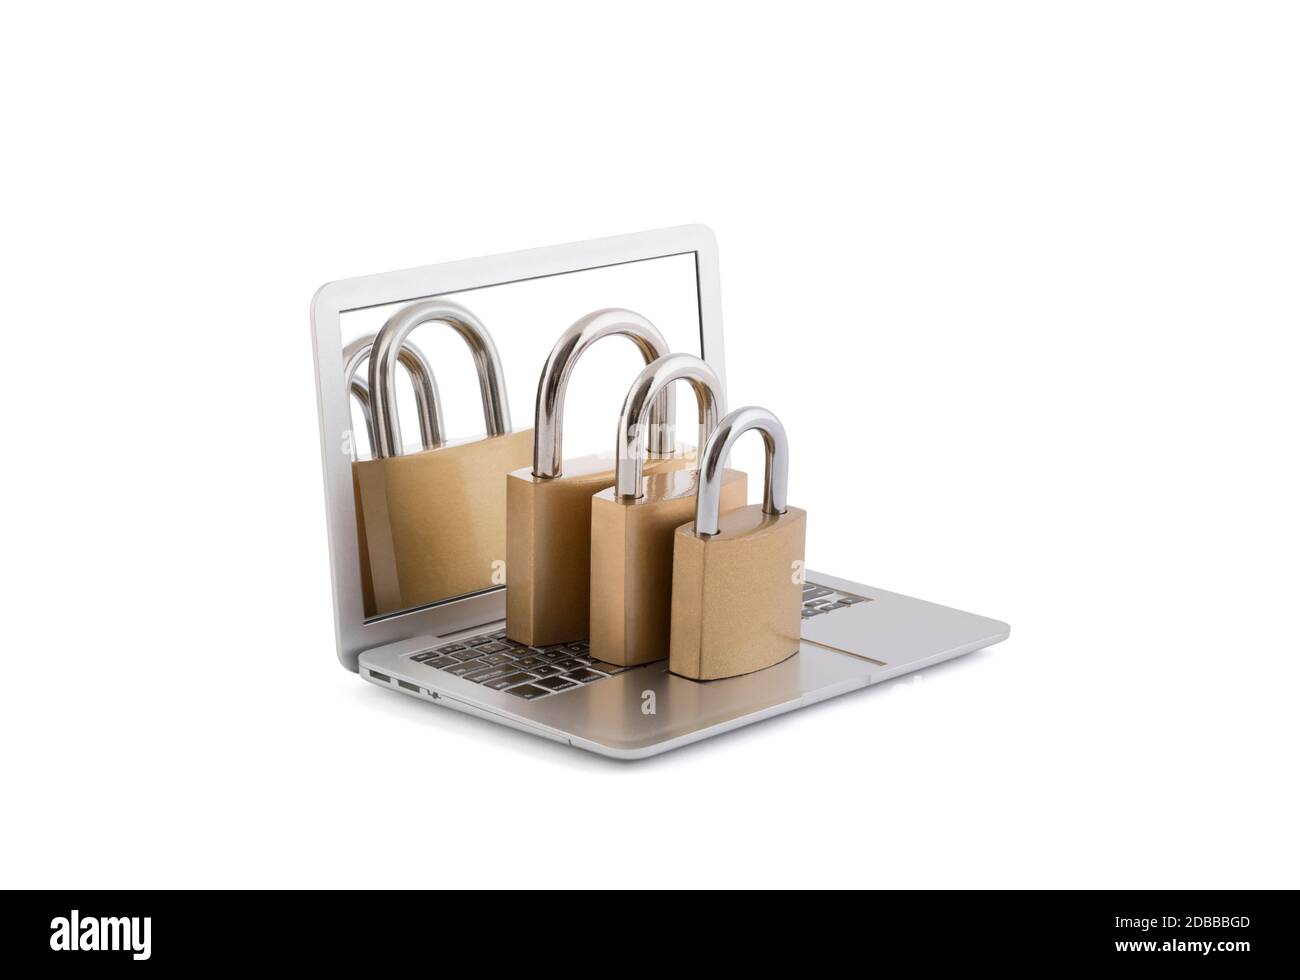 Computer security concept. Three padlocks on laptop isolated on white with clipping path Stock Photo